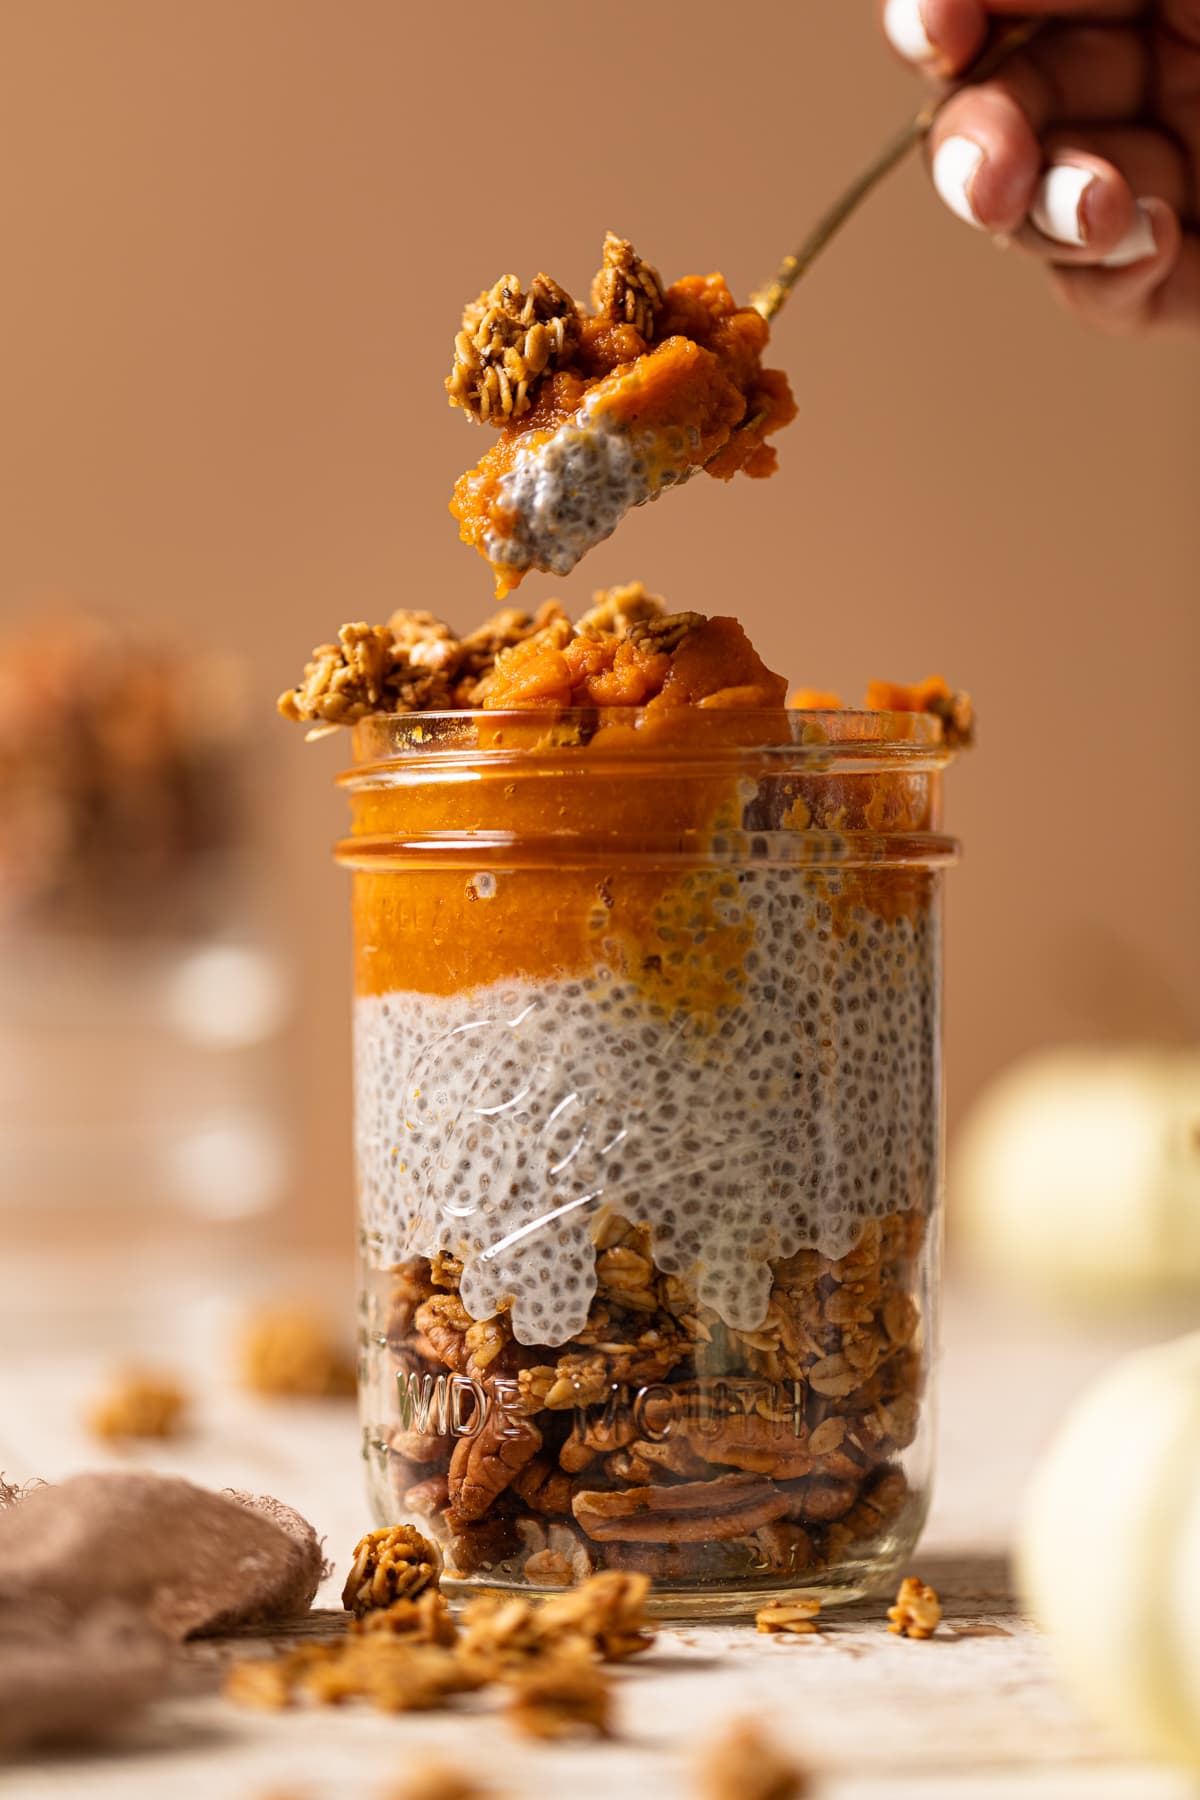 Spoon scooping from a jar of Pumpkin Pie Chia Pudding